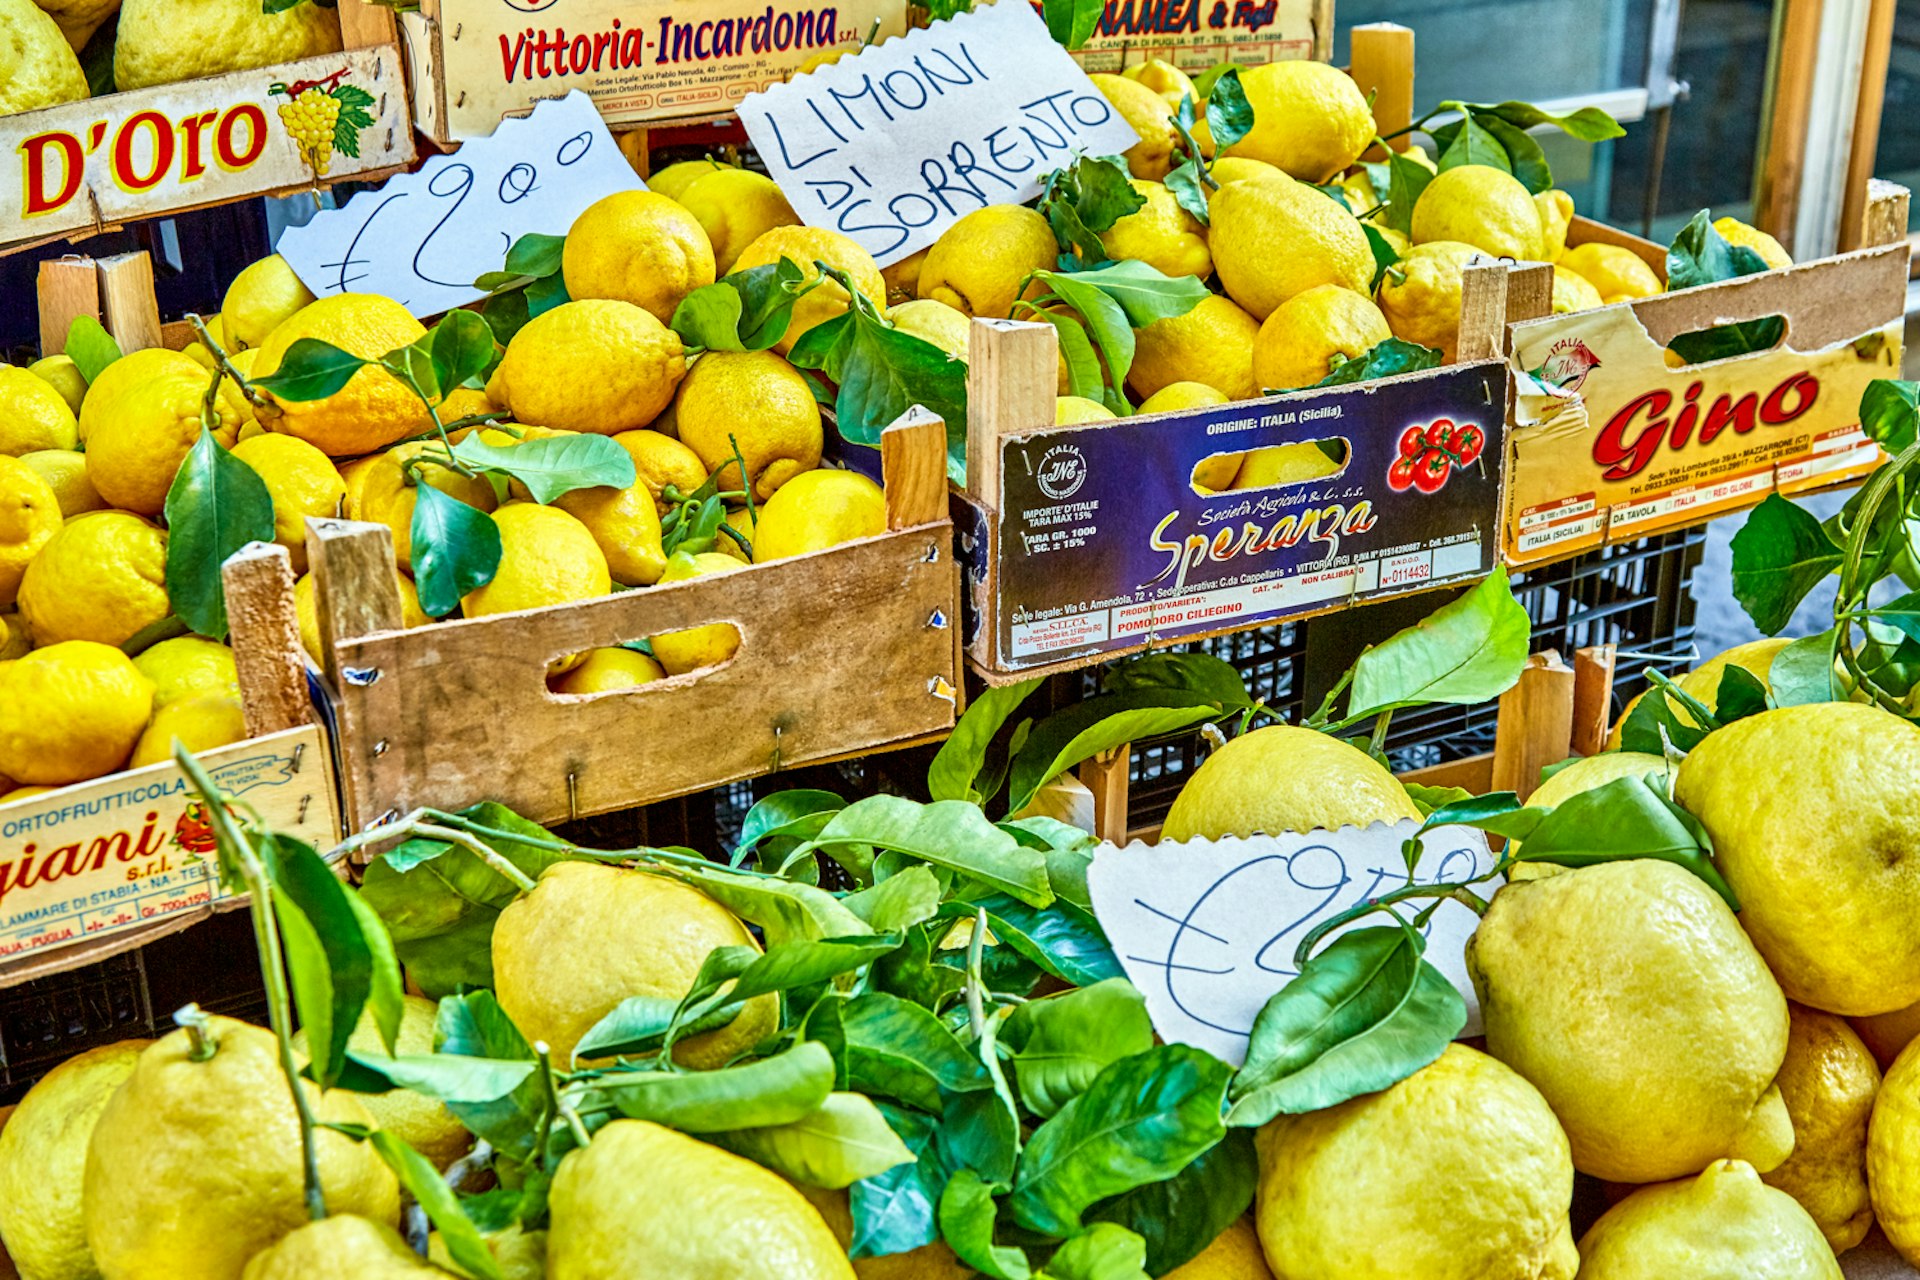 The region is known for growing Sfusato lemons, a key ingredient in limoncello. Image by Peter Unger / Lonely Planet Images / Getty